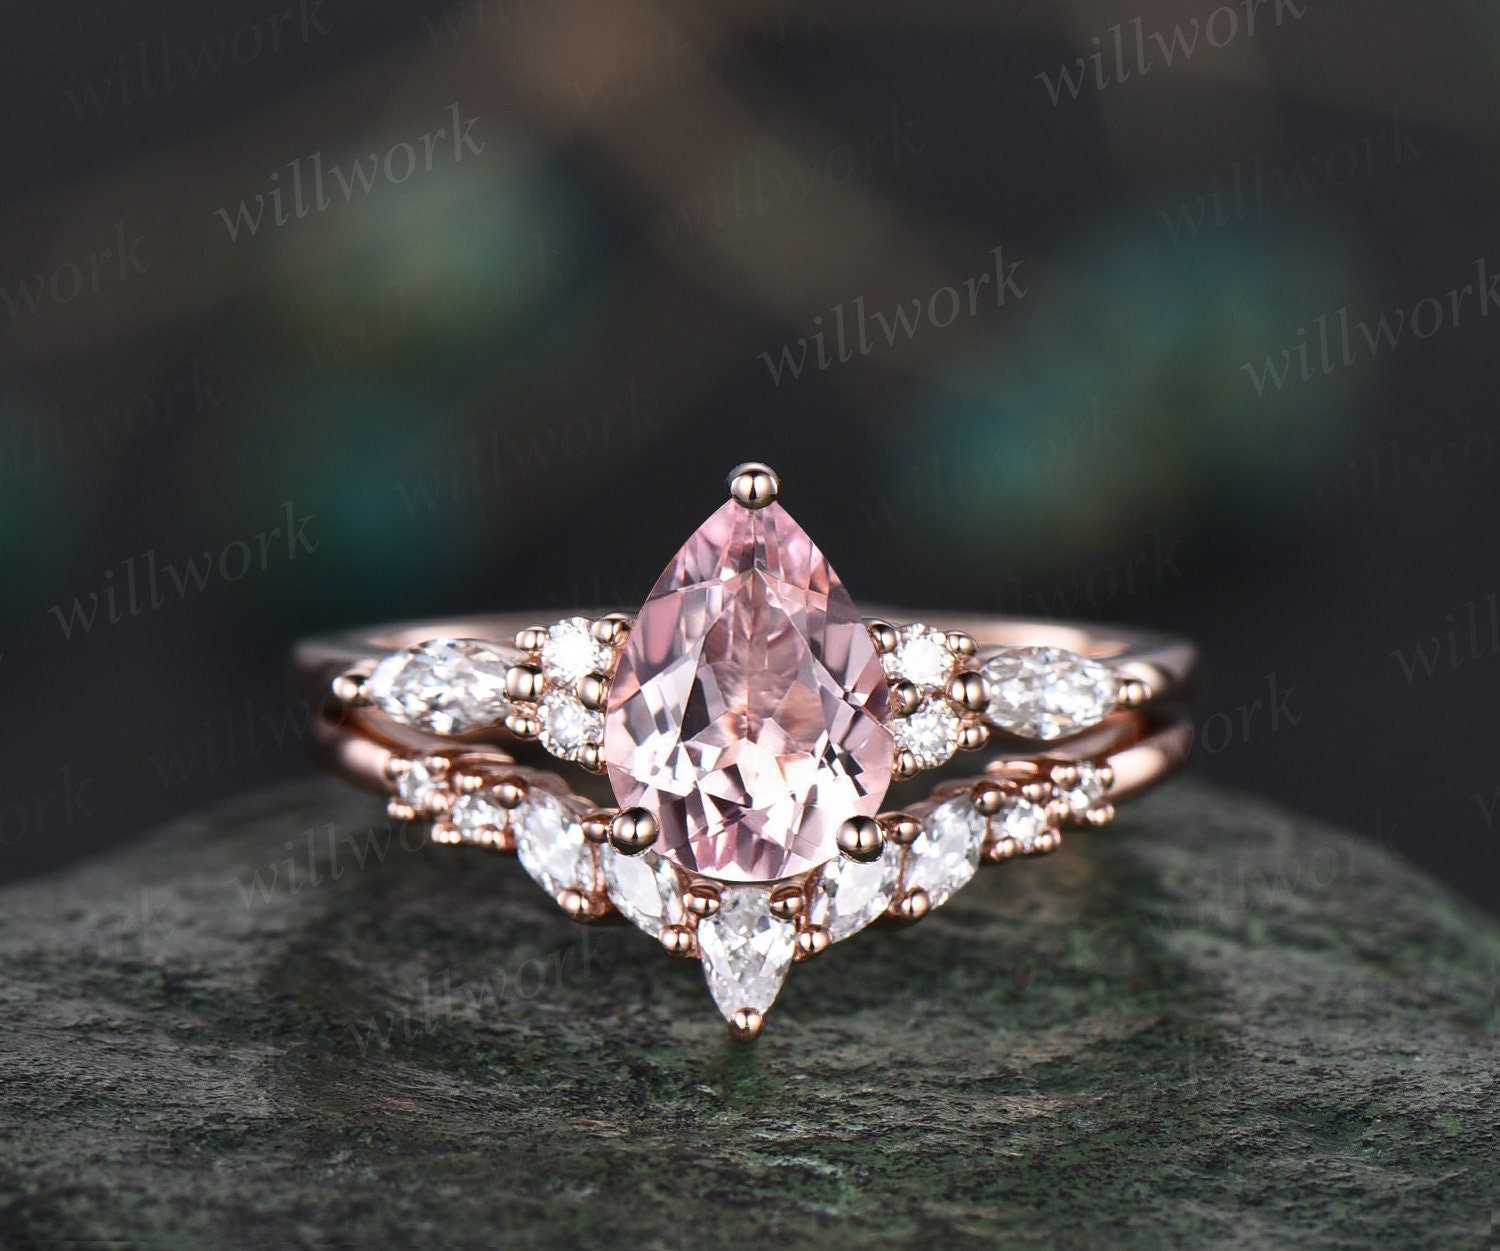 Natural Real Light Pink Diamond Ring 1.23 Ct Pear Cut SI2 GIA Certified 18K  Gold | eBay